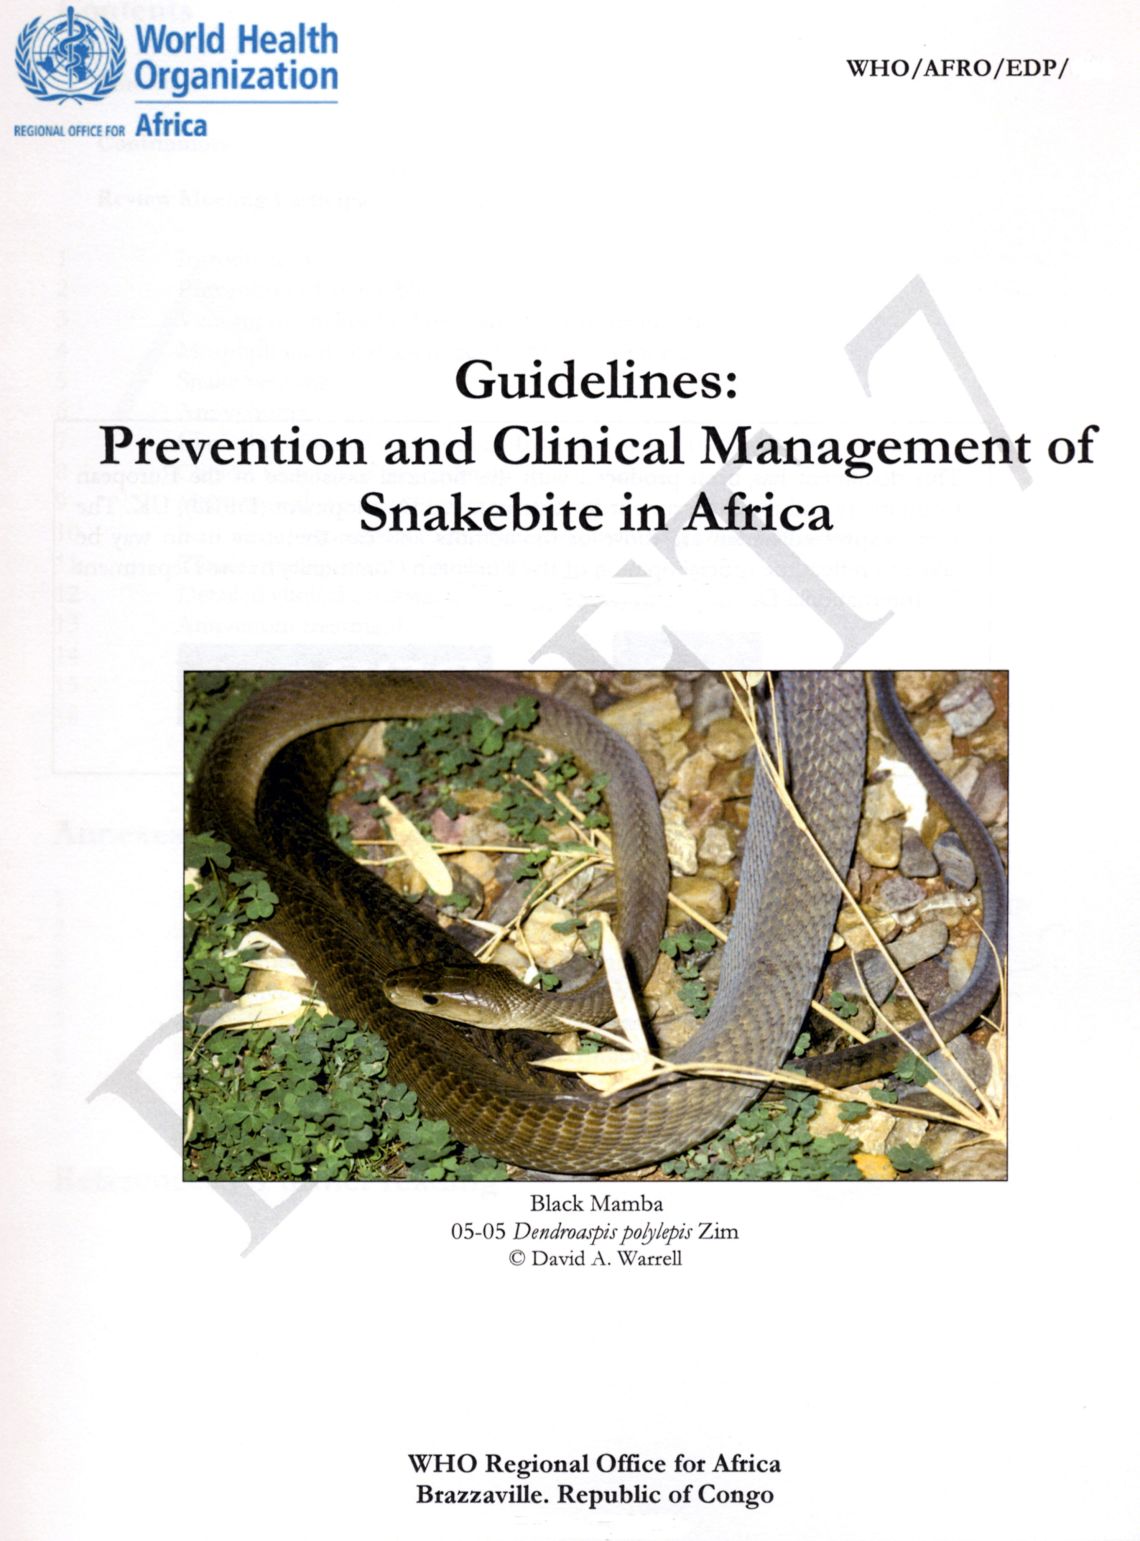 WHO AFRO Guidelines: Prevention and Clinical Management of Snakebite in Africa. WHO Regional Office for Africa Brazzaville, 2010.